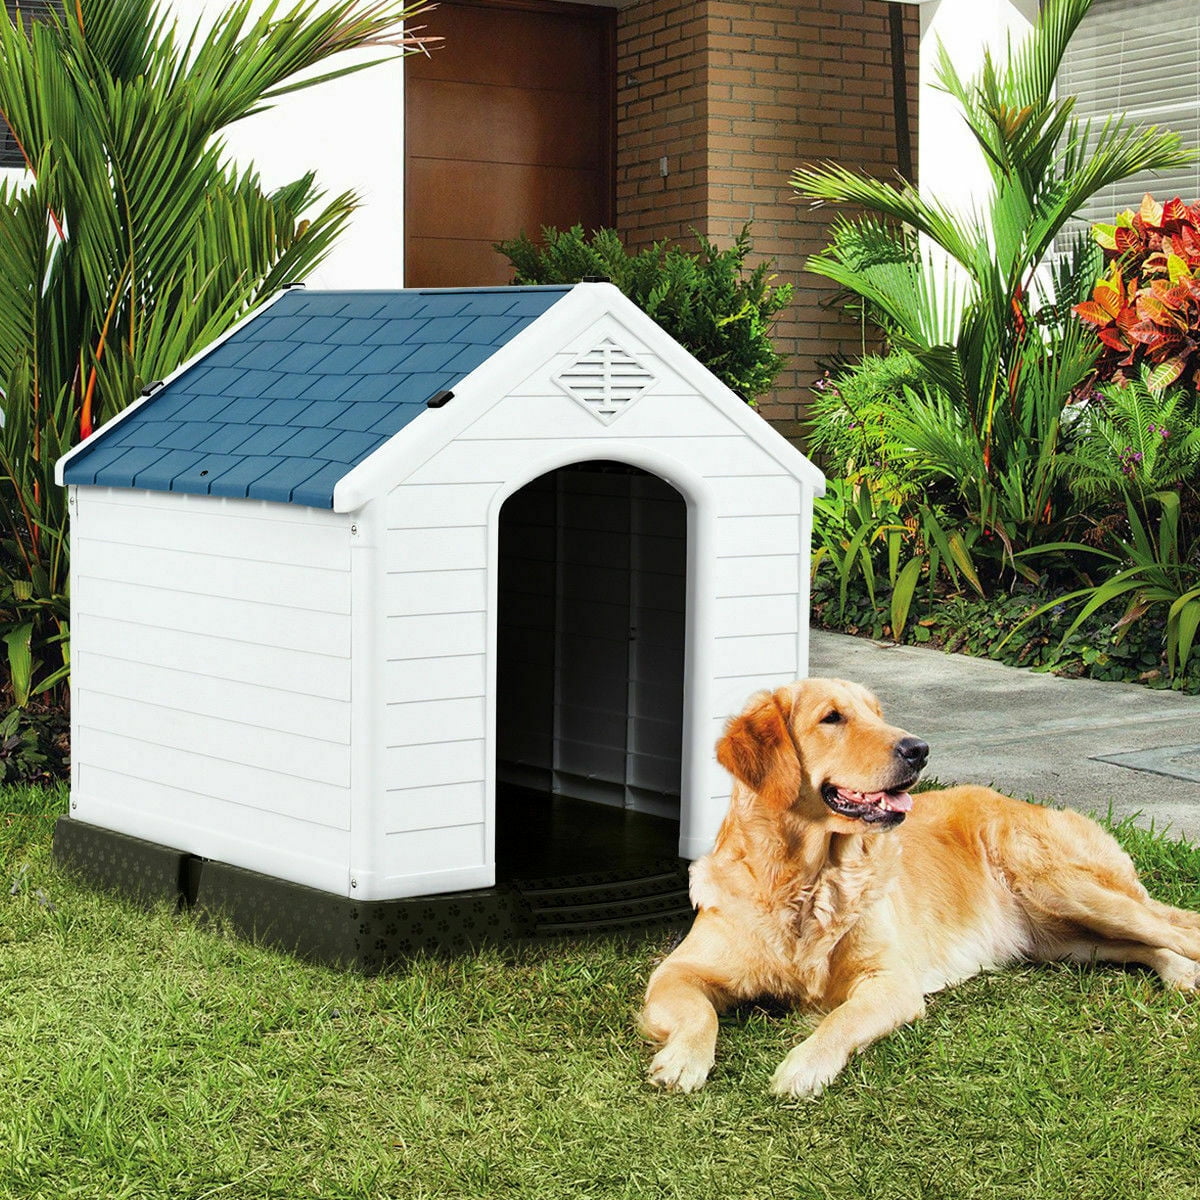 Plastic Dog Houses Outdoor Insulated Weatherproof Dog Houses Outside with Door Cat House